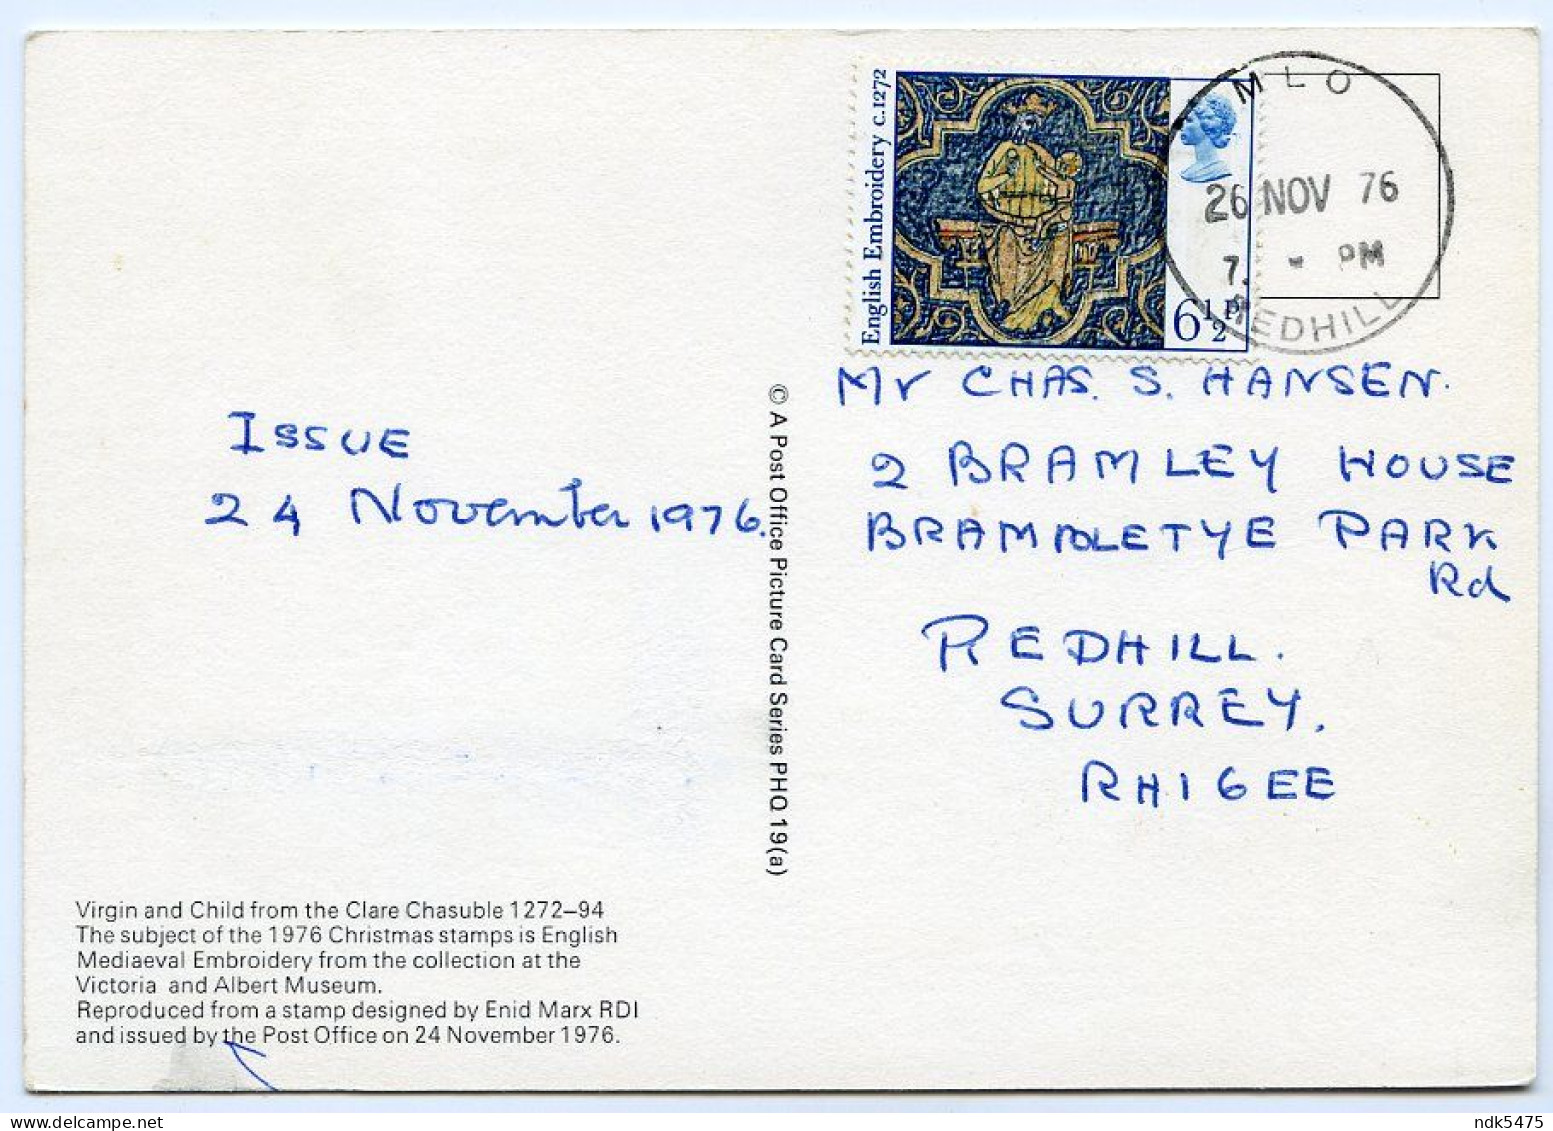 POSTMARK : MLO REDHILL, 1976 / VICTORIA AND ALBERT MUSEUM PHQ - VIRGIN AND CHILD  (10 X 15cms Approx.) - Tarjetas PHQ